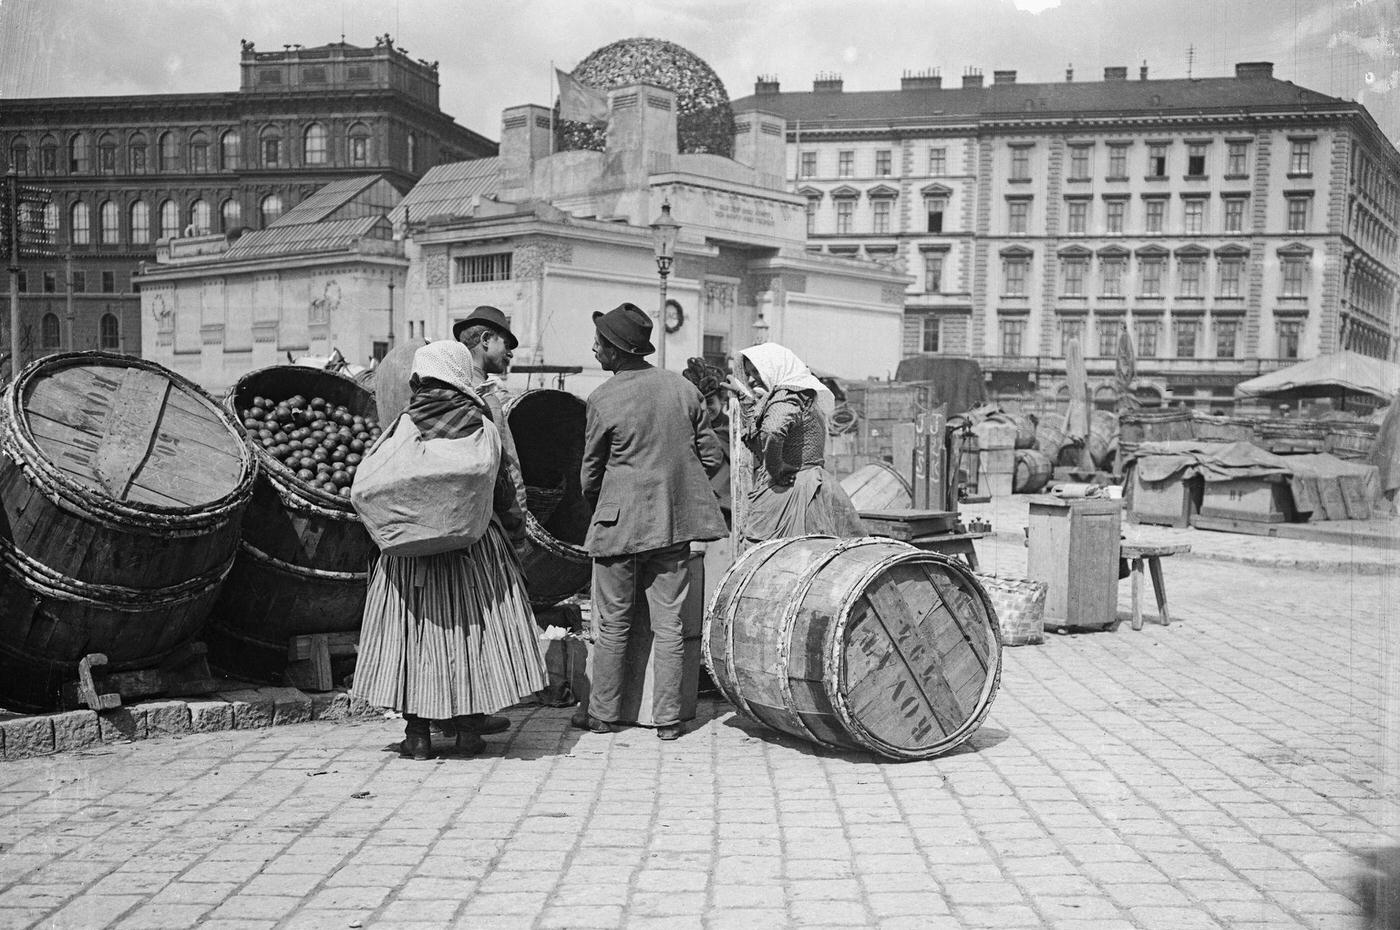 The Naschmarkt in front of the Secession, Vienna, 1900s